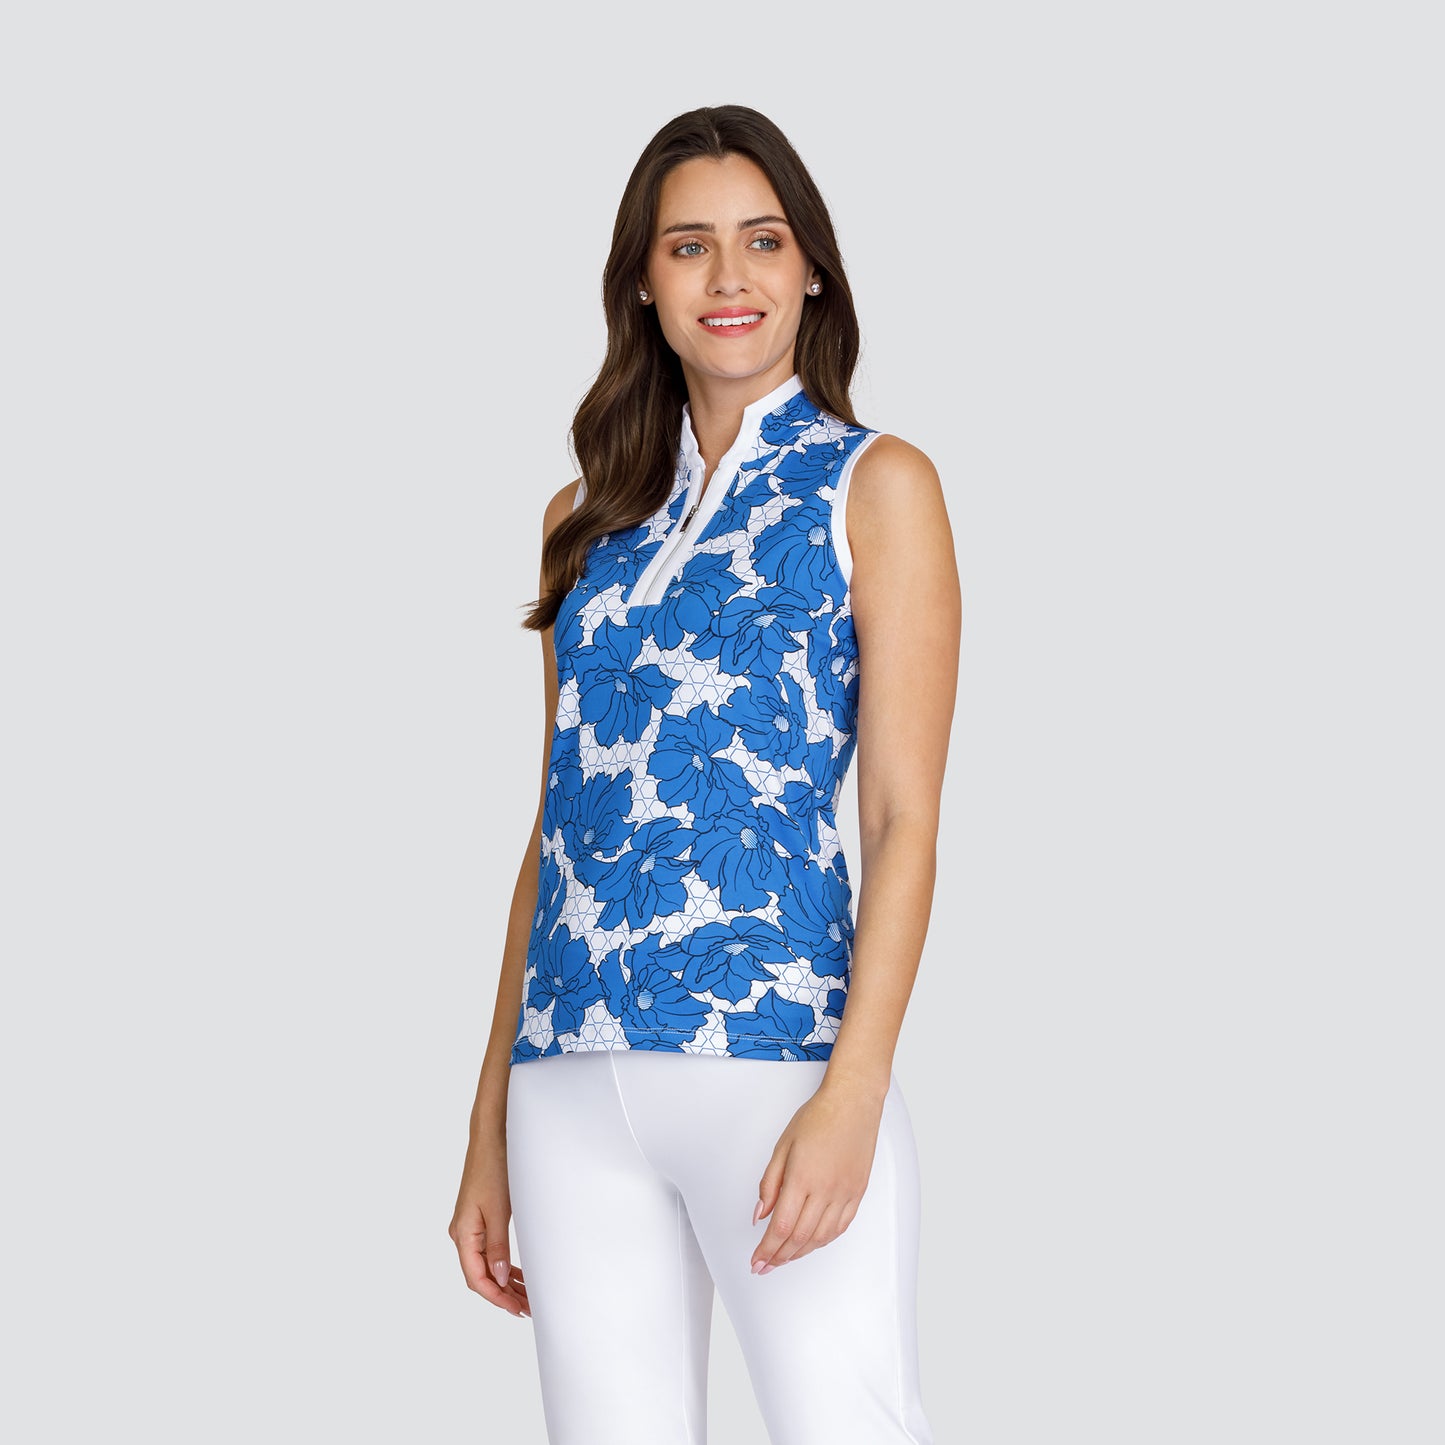 Tail Ladies Sleeveless Polo in a Floral and Hexagonal Print 